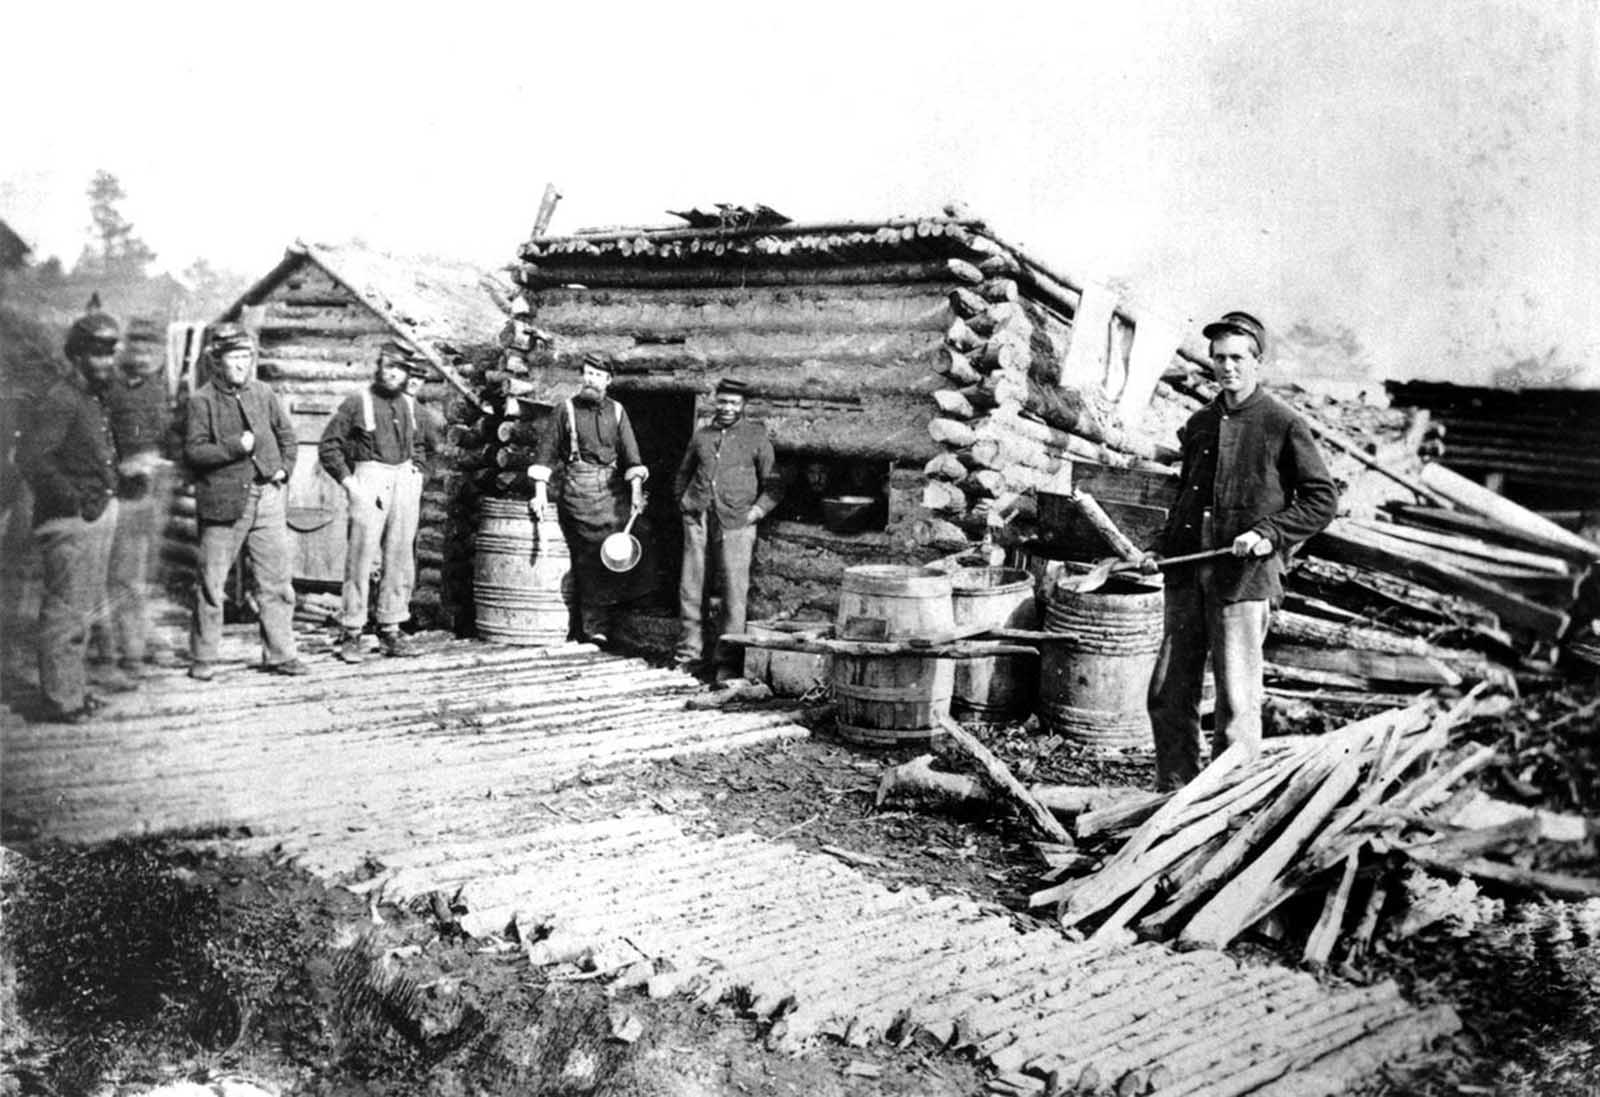 Serving as a soldier in uniform and getting regular army pay, a former slave (center, with hands in pockets) stands with other Federal soldiers at the Army of the Potomac winter headquarters near Fredericksburg, Virginia, The log hut served as a mess house for the regiment.